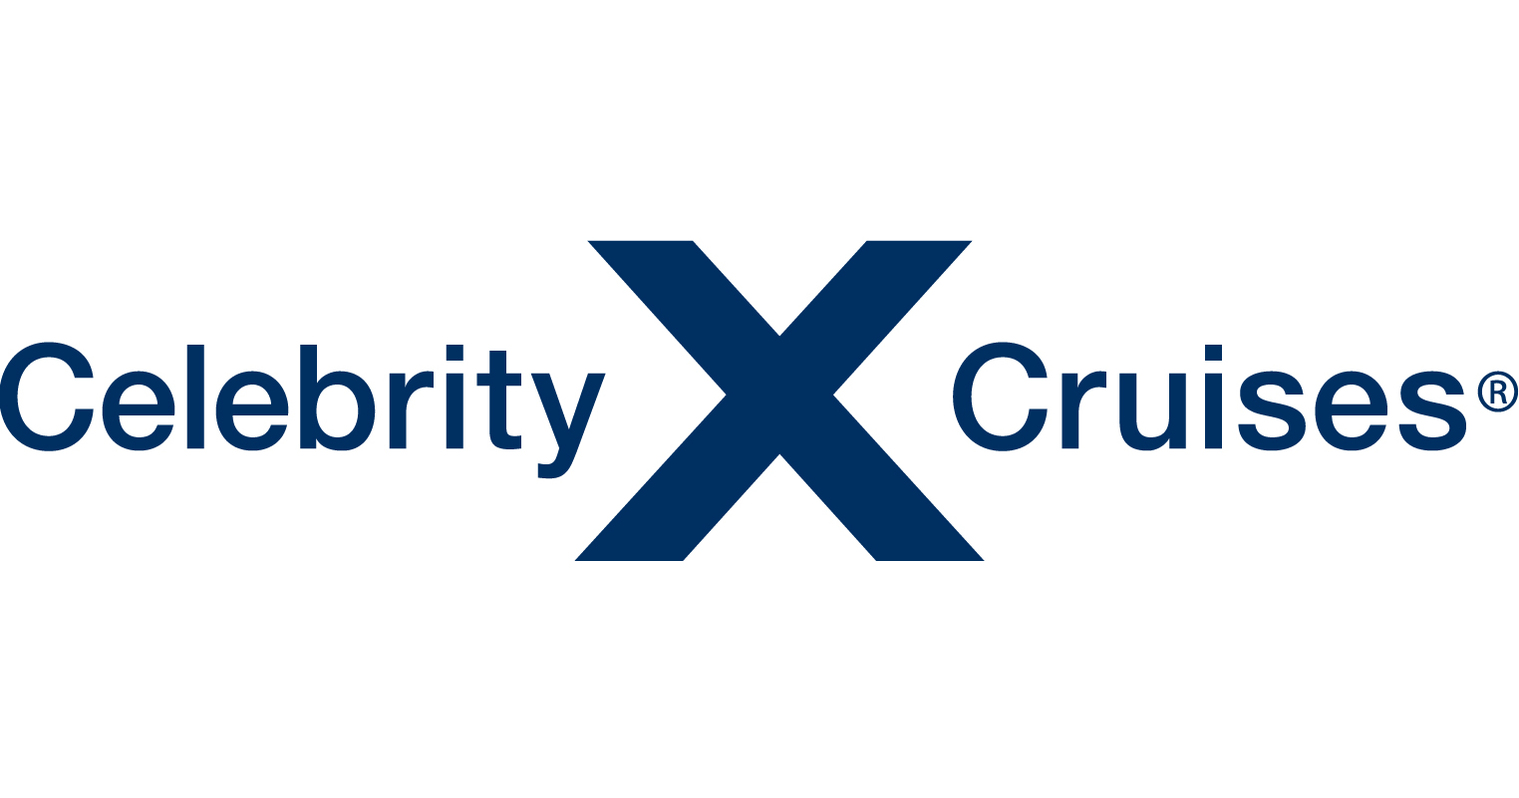 Celebrity Cruises Is Proud To Offer Legal Same Sex Marriages Onboard